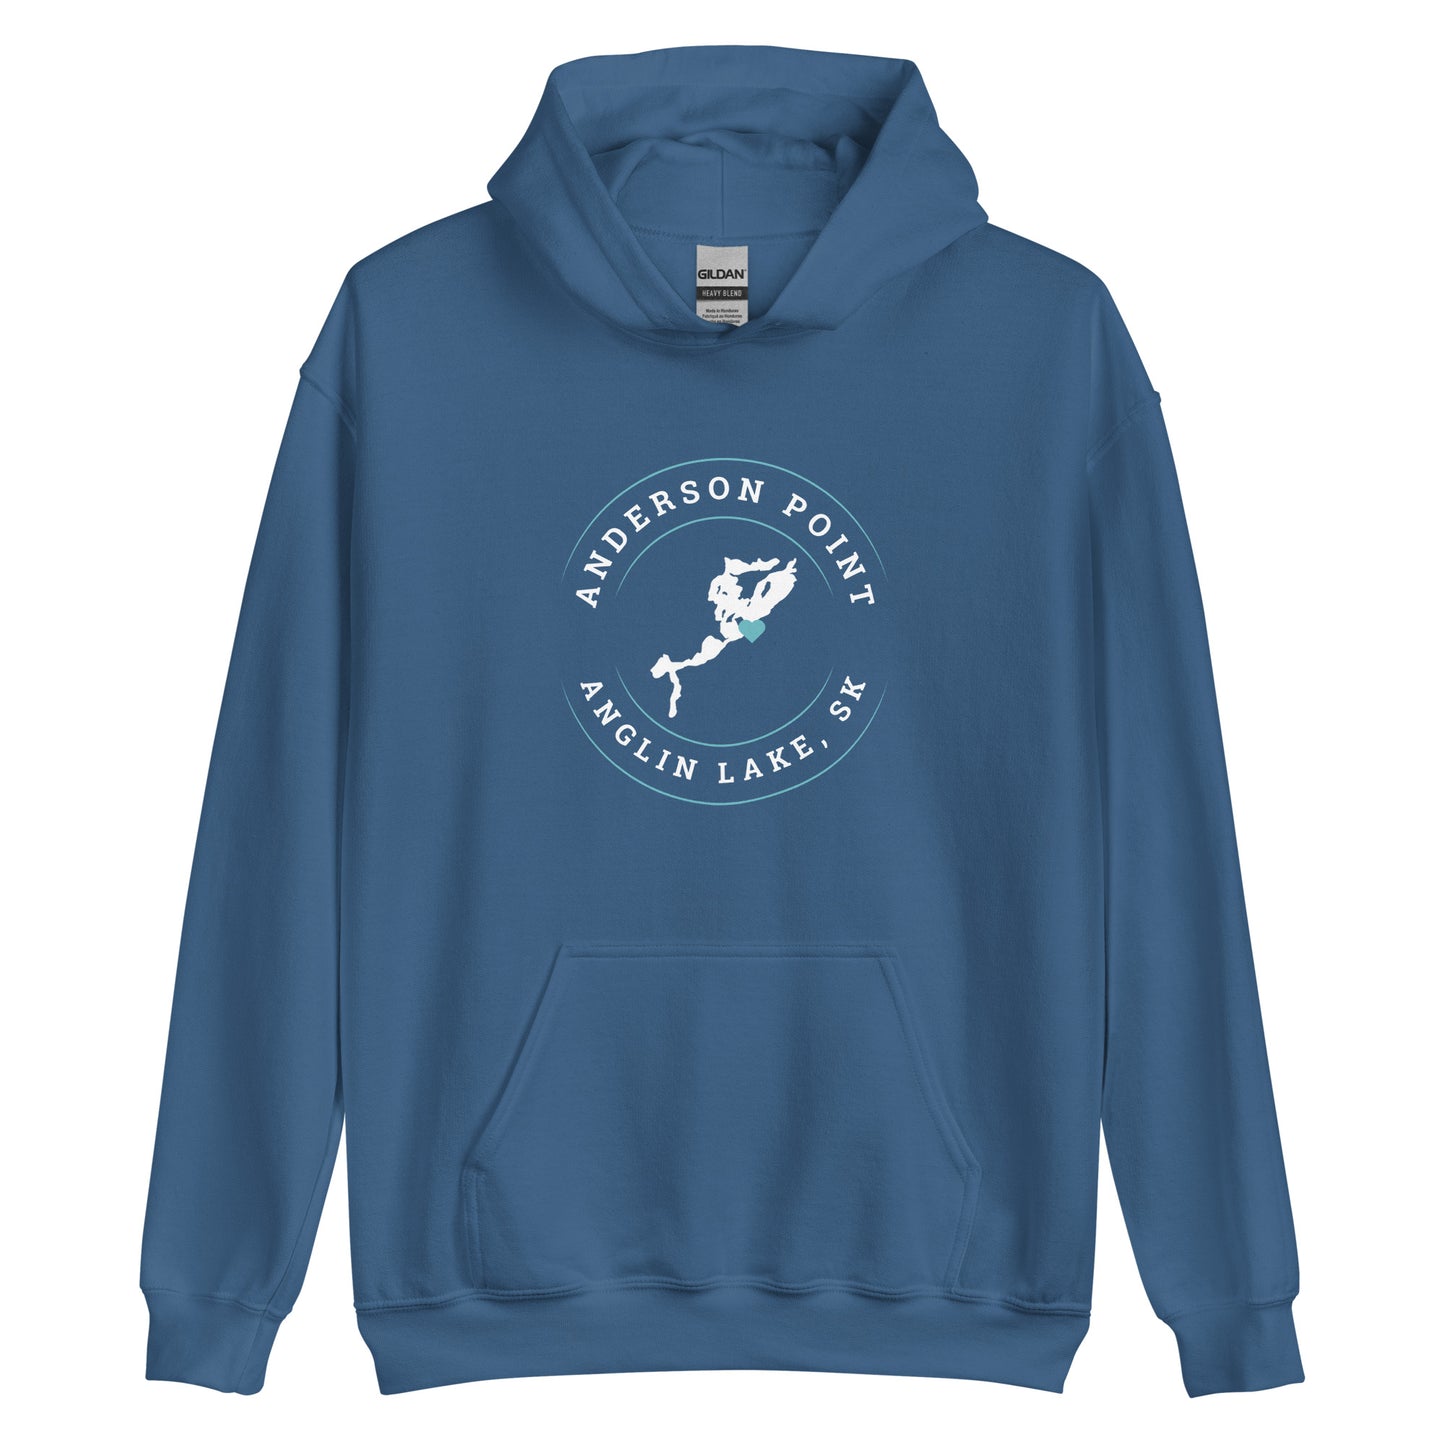 Anglin Lake, SK - Unisex Hoodie - Anderson Point